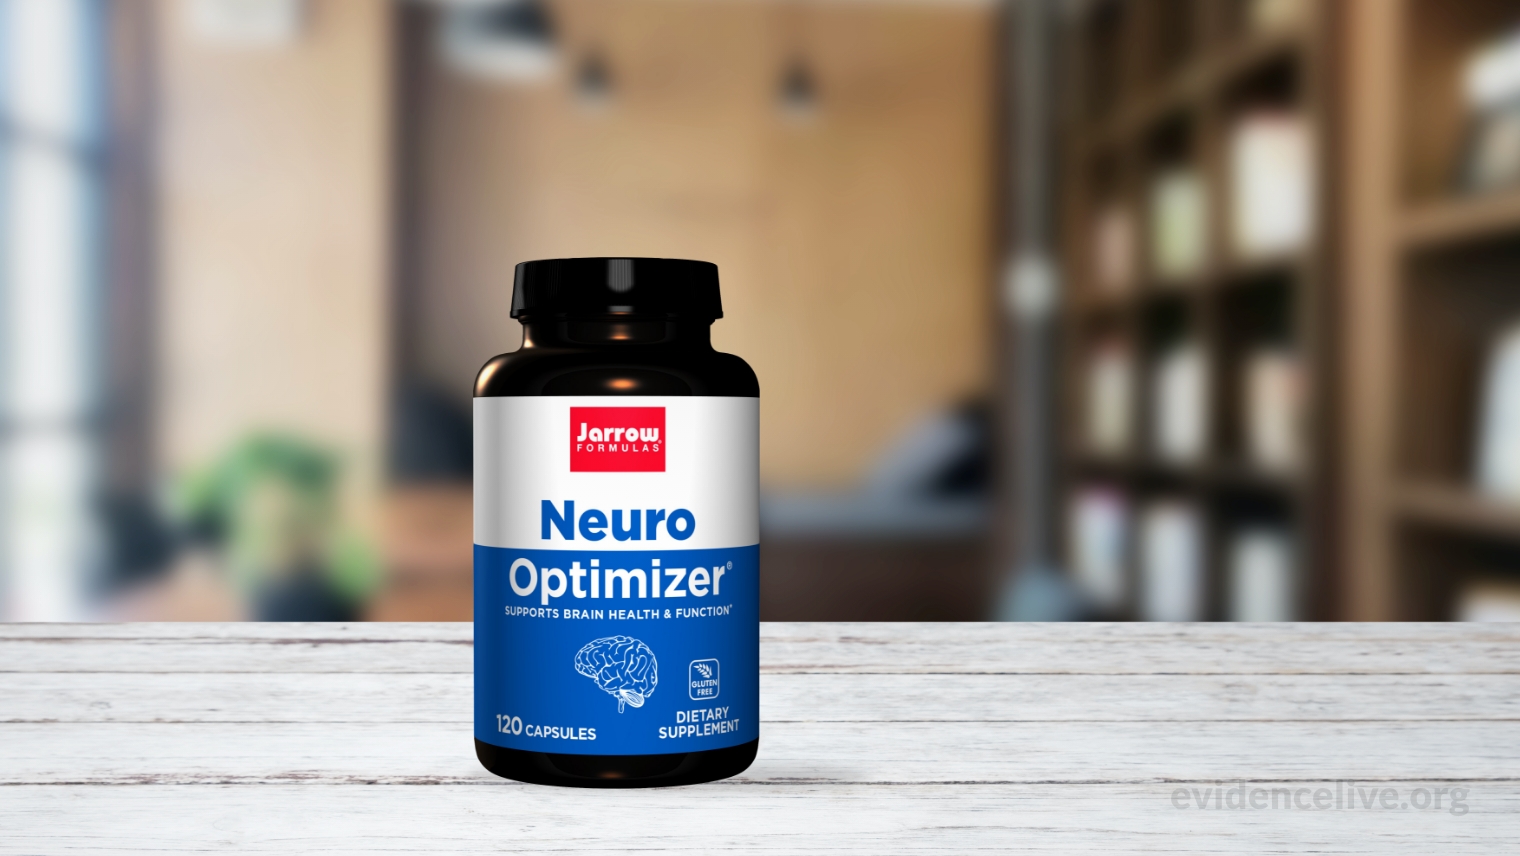 Neuro Optimizer benefits and effects